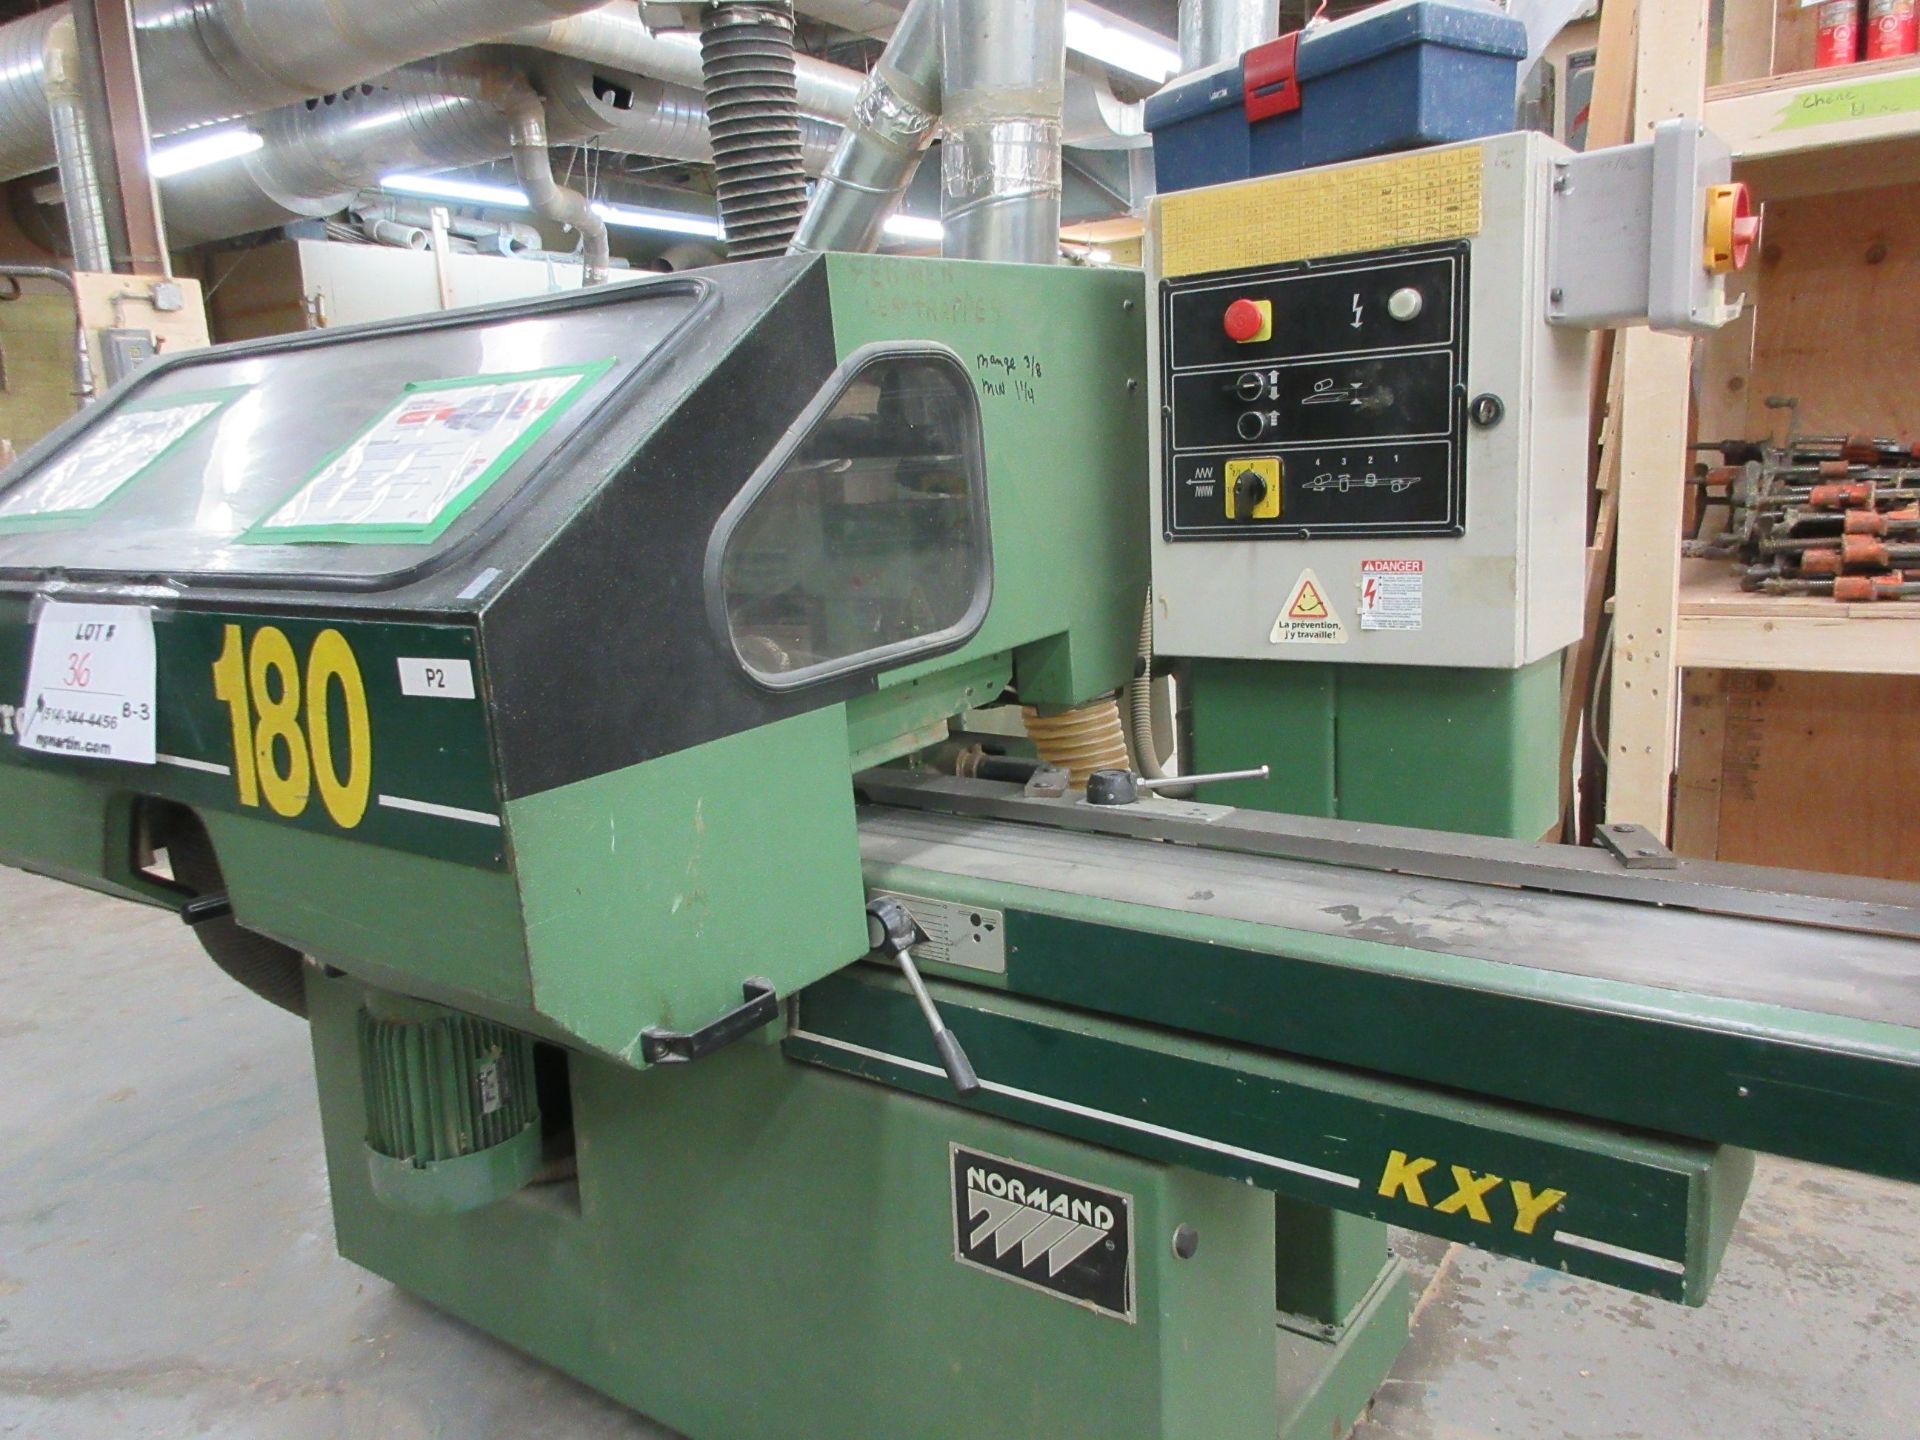 GUILLIET moulder /(4) head planer, Mod: LA CORROYENCE 180 (SUBJECT TO BANK APPROVAL) - Image 2 of 6